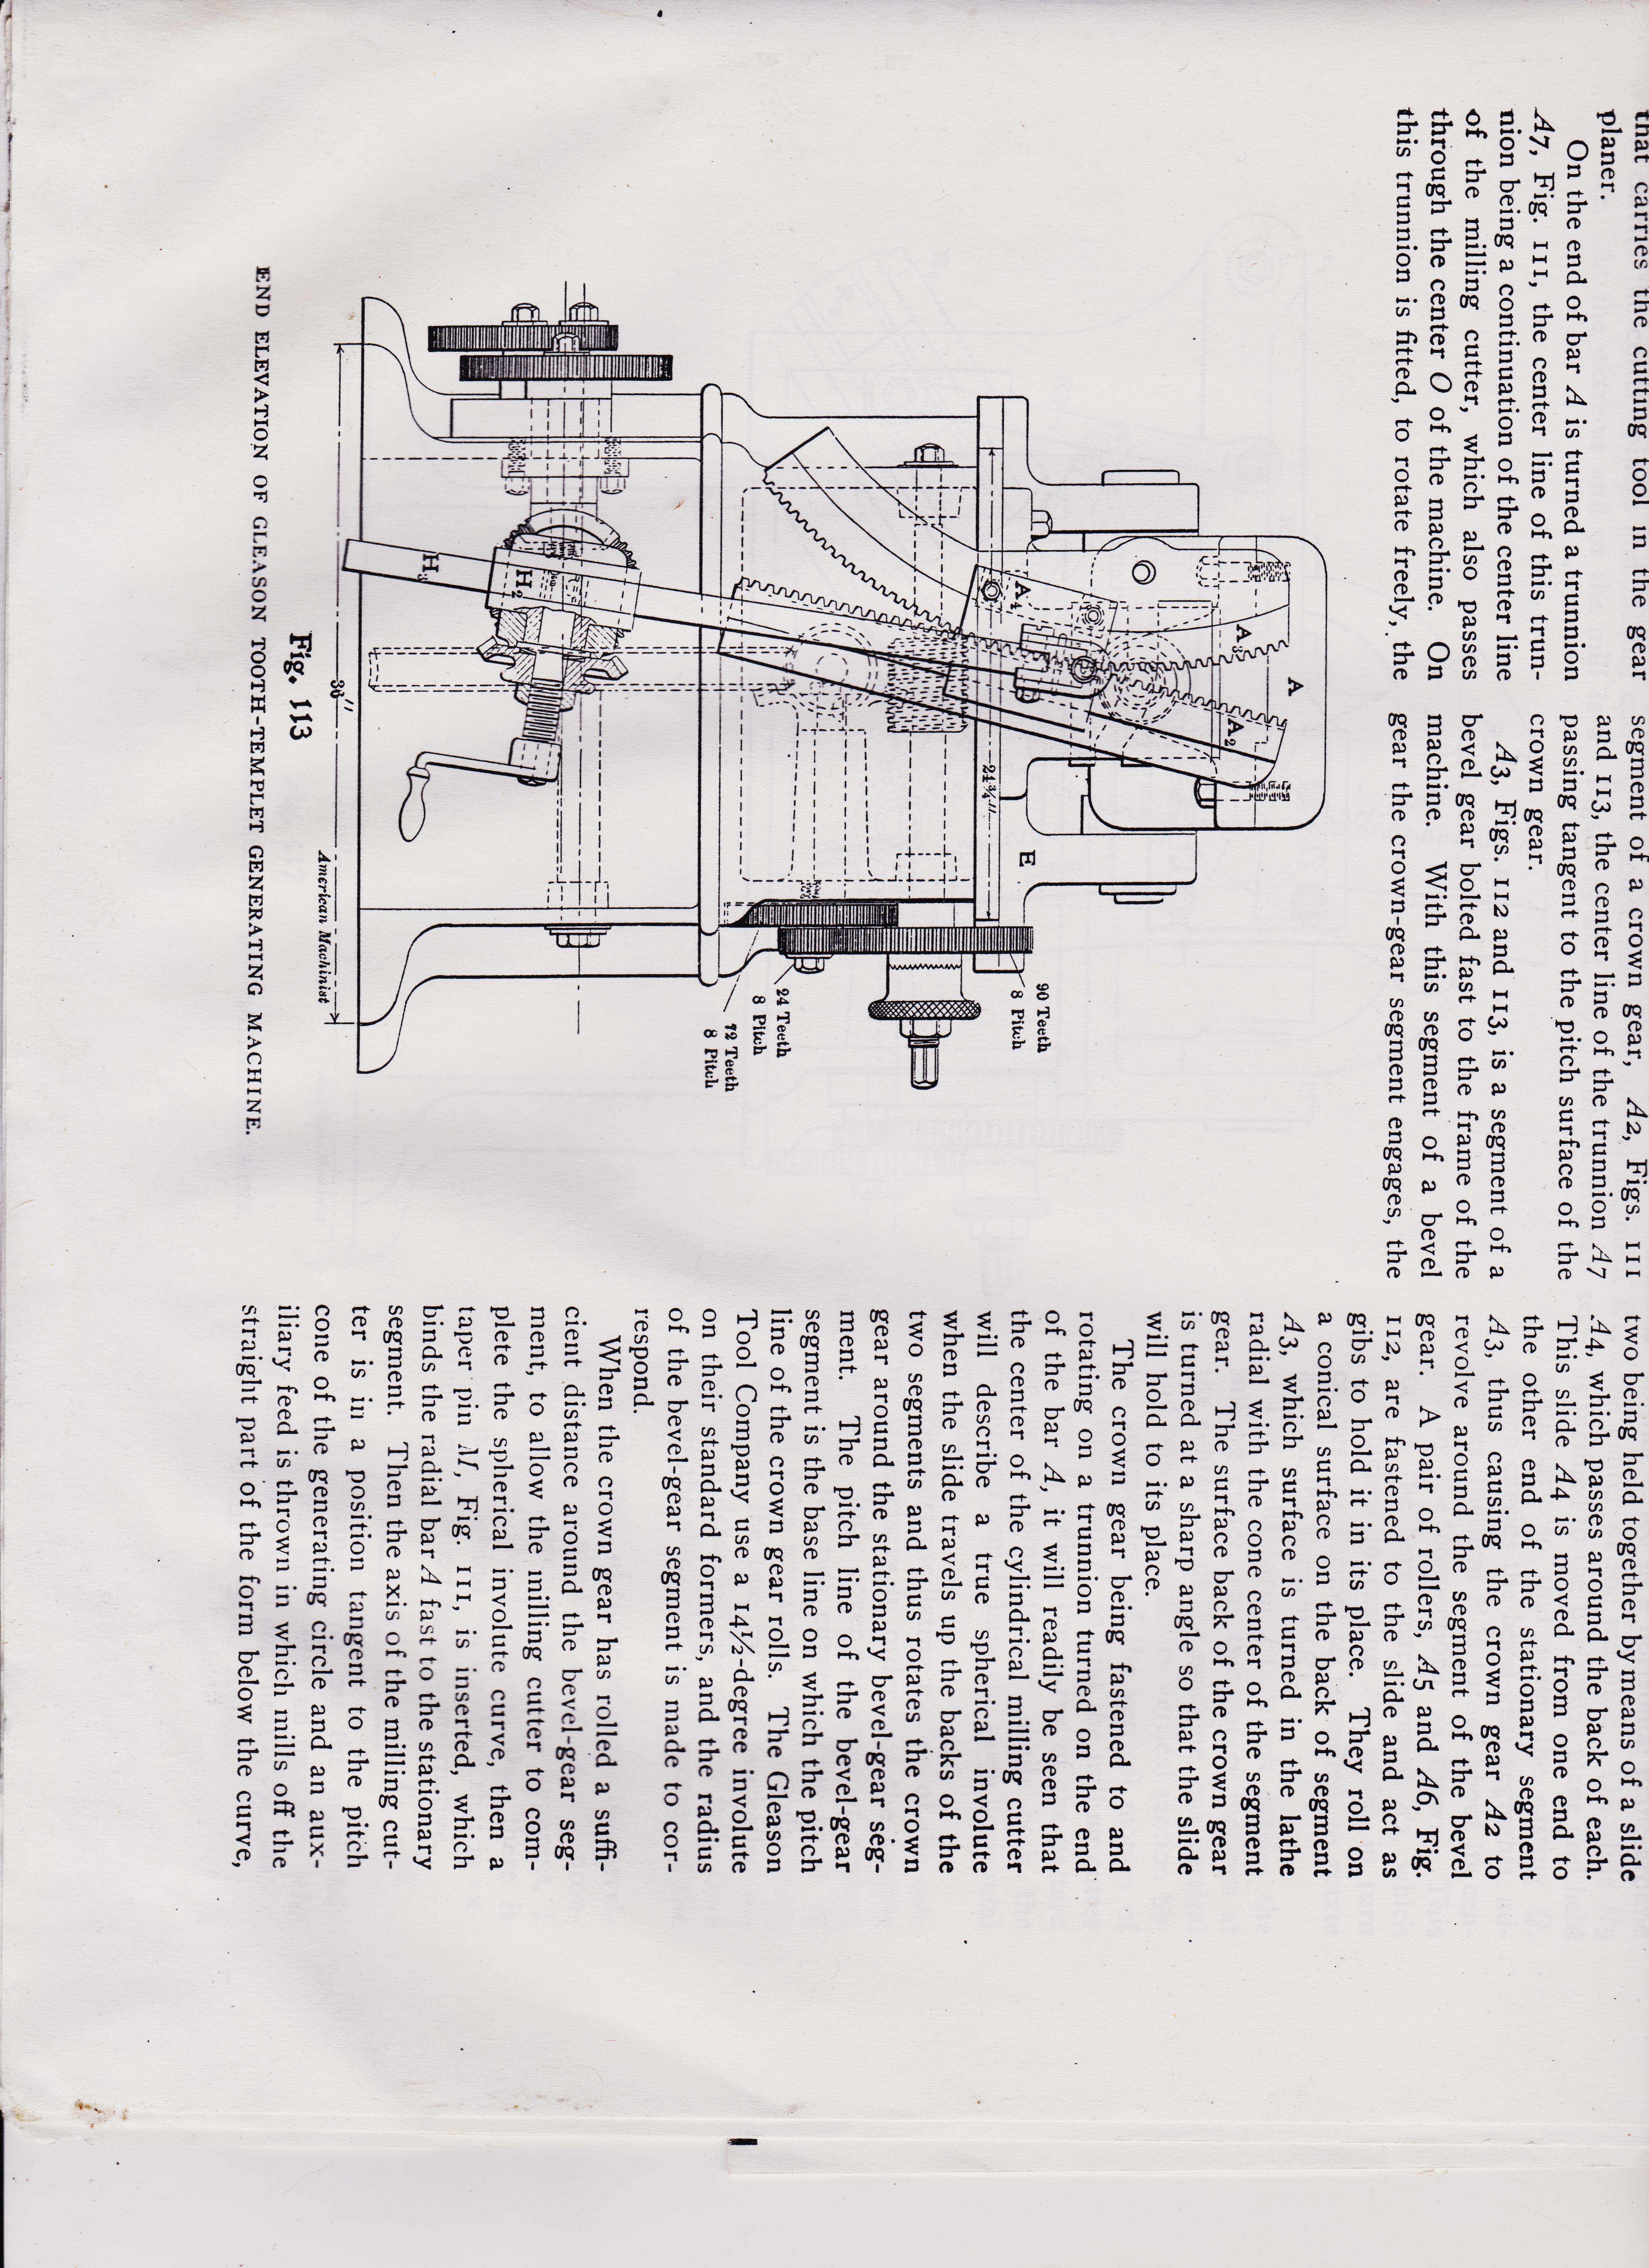 https://antiquemachinery.com/images-American-Machinist-Nov-8-1900-bot-The-Gleason-Bevel-Gear-Toot-Planer/American-Machinist-Nov-8-1900-pg-30-1061-bot-Line-drawing-of-the-machine-side-and-partial-section-gears-work-are-machined-cut-how-the-machne-works-Mechanism--Gleason-Templet-Bevel-Pinion-Tooth-Generating-Machine.jpeg